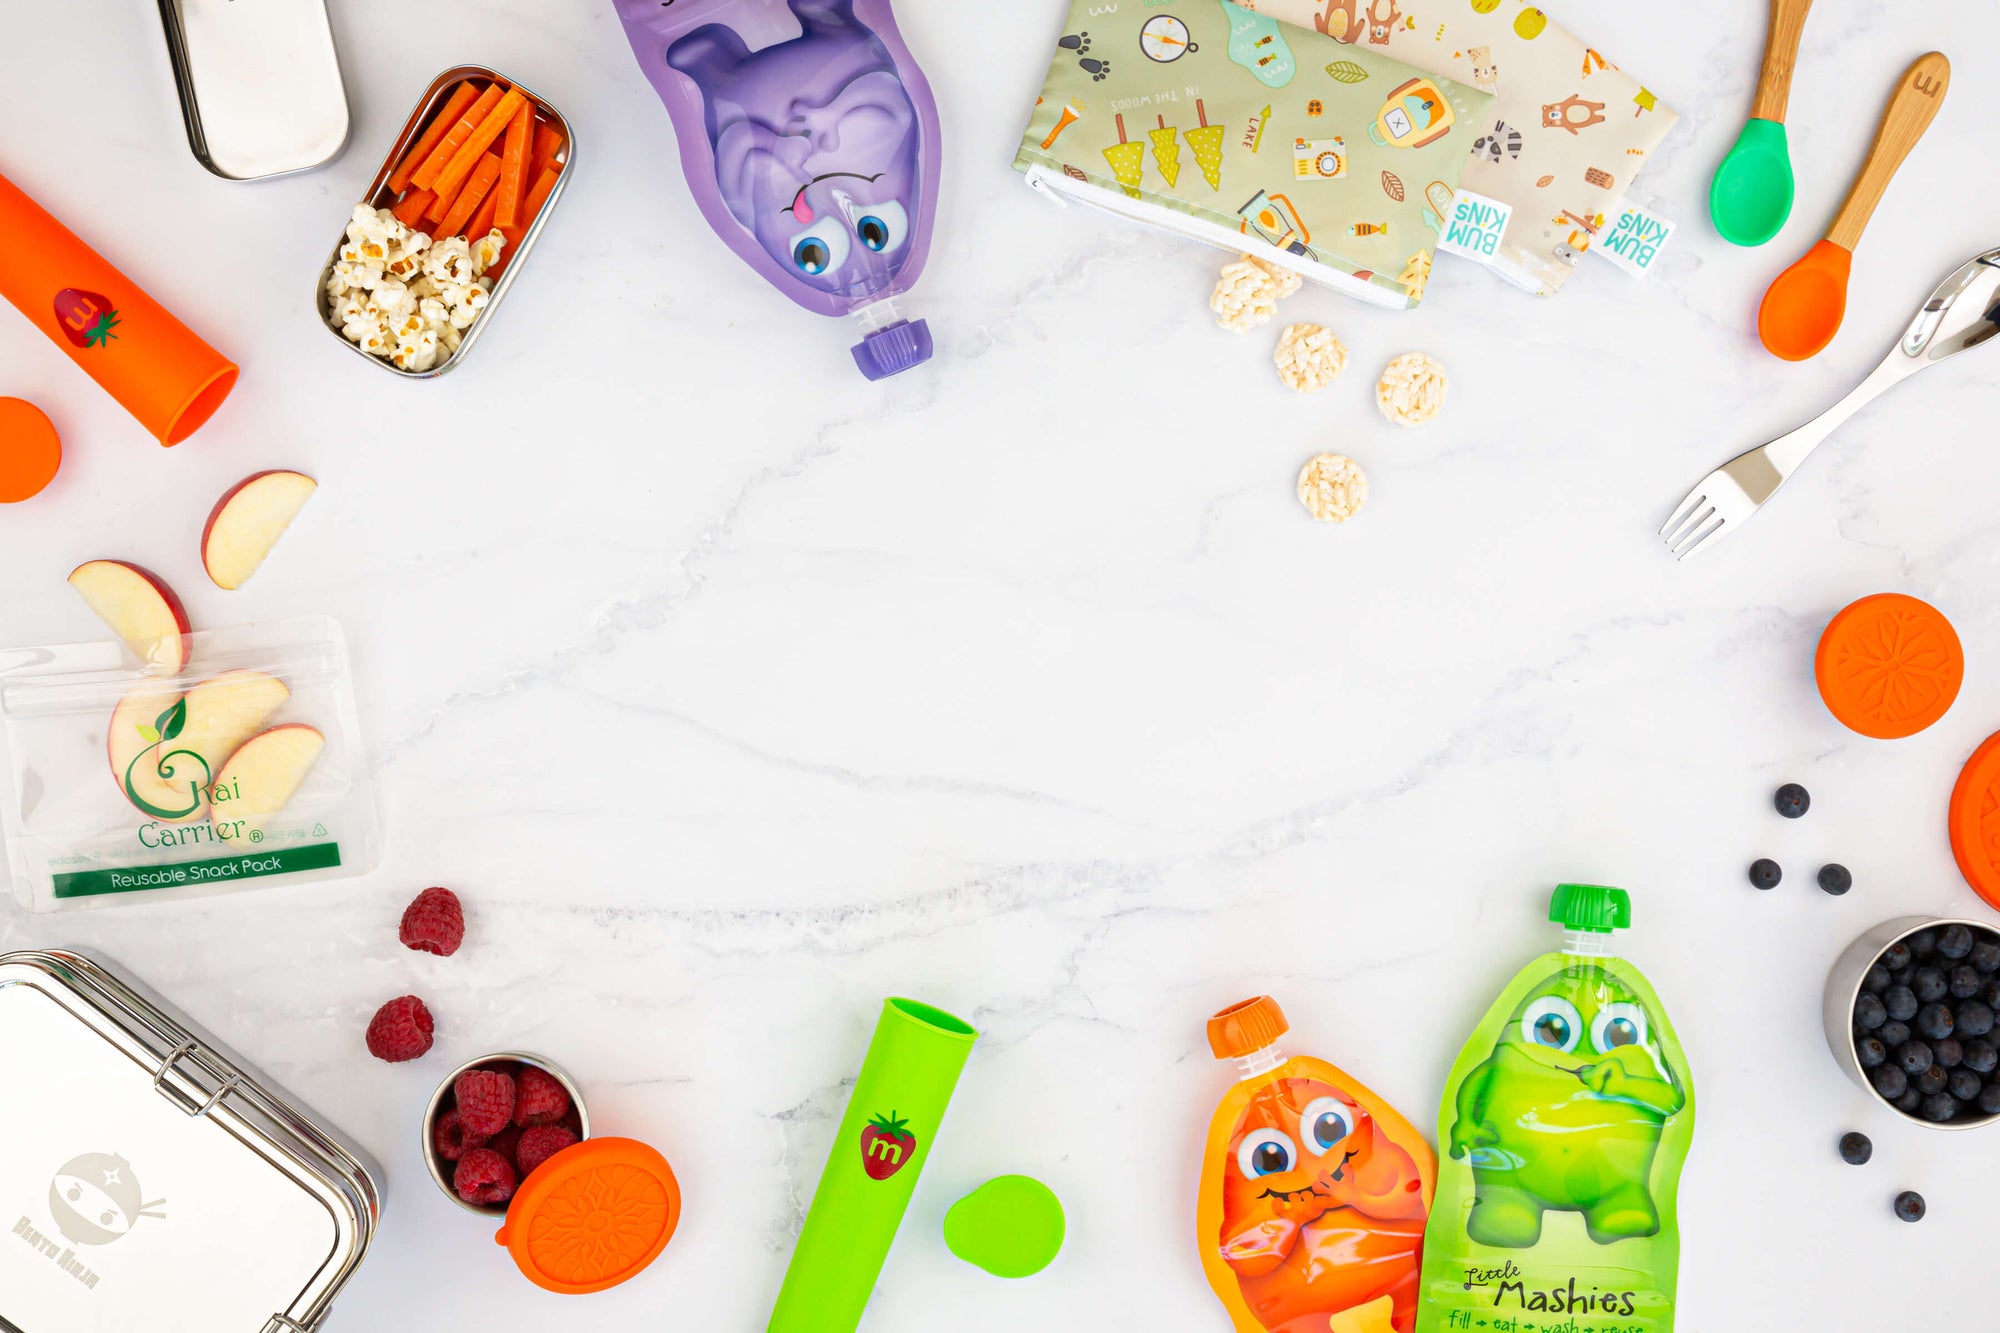 Eco friendly reusables, for kids lunches and snacks. Image include a stainless steel lunchbox, silicone ice pops, reusable food/yogurt pouches, snack pots, snack bags, spoons and a spork.